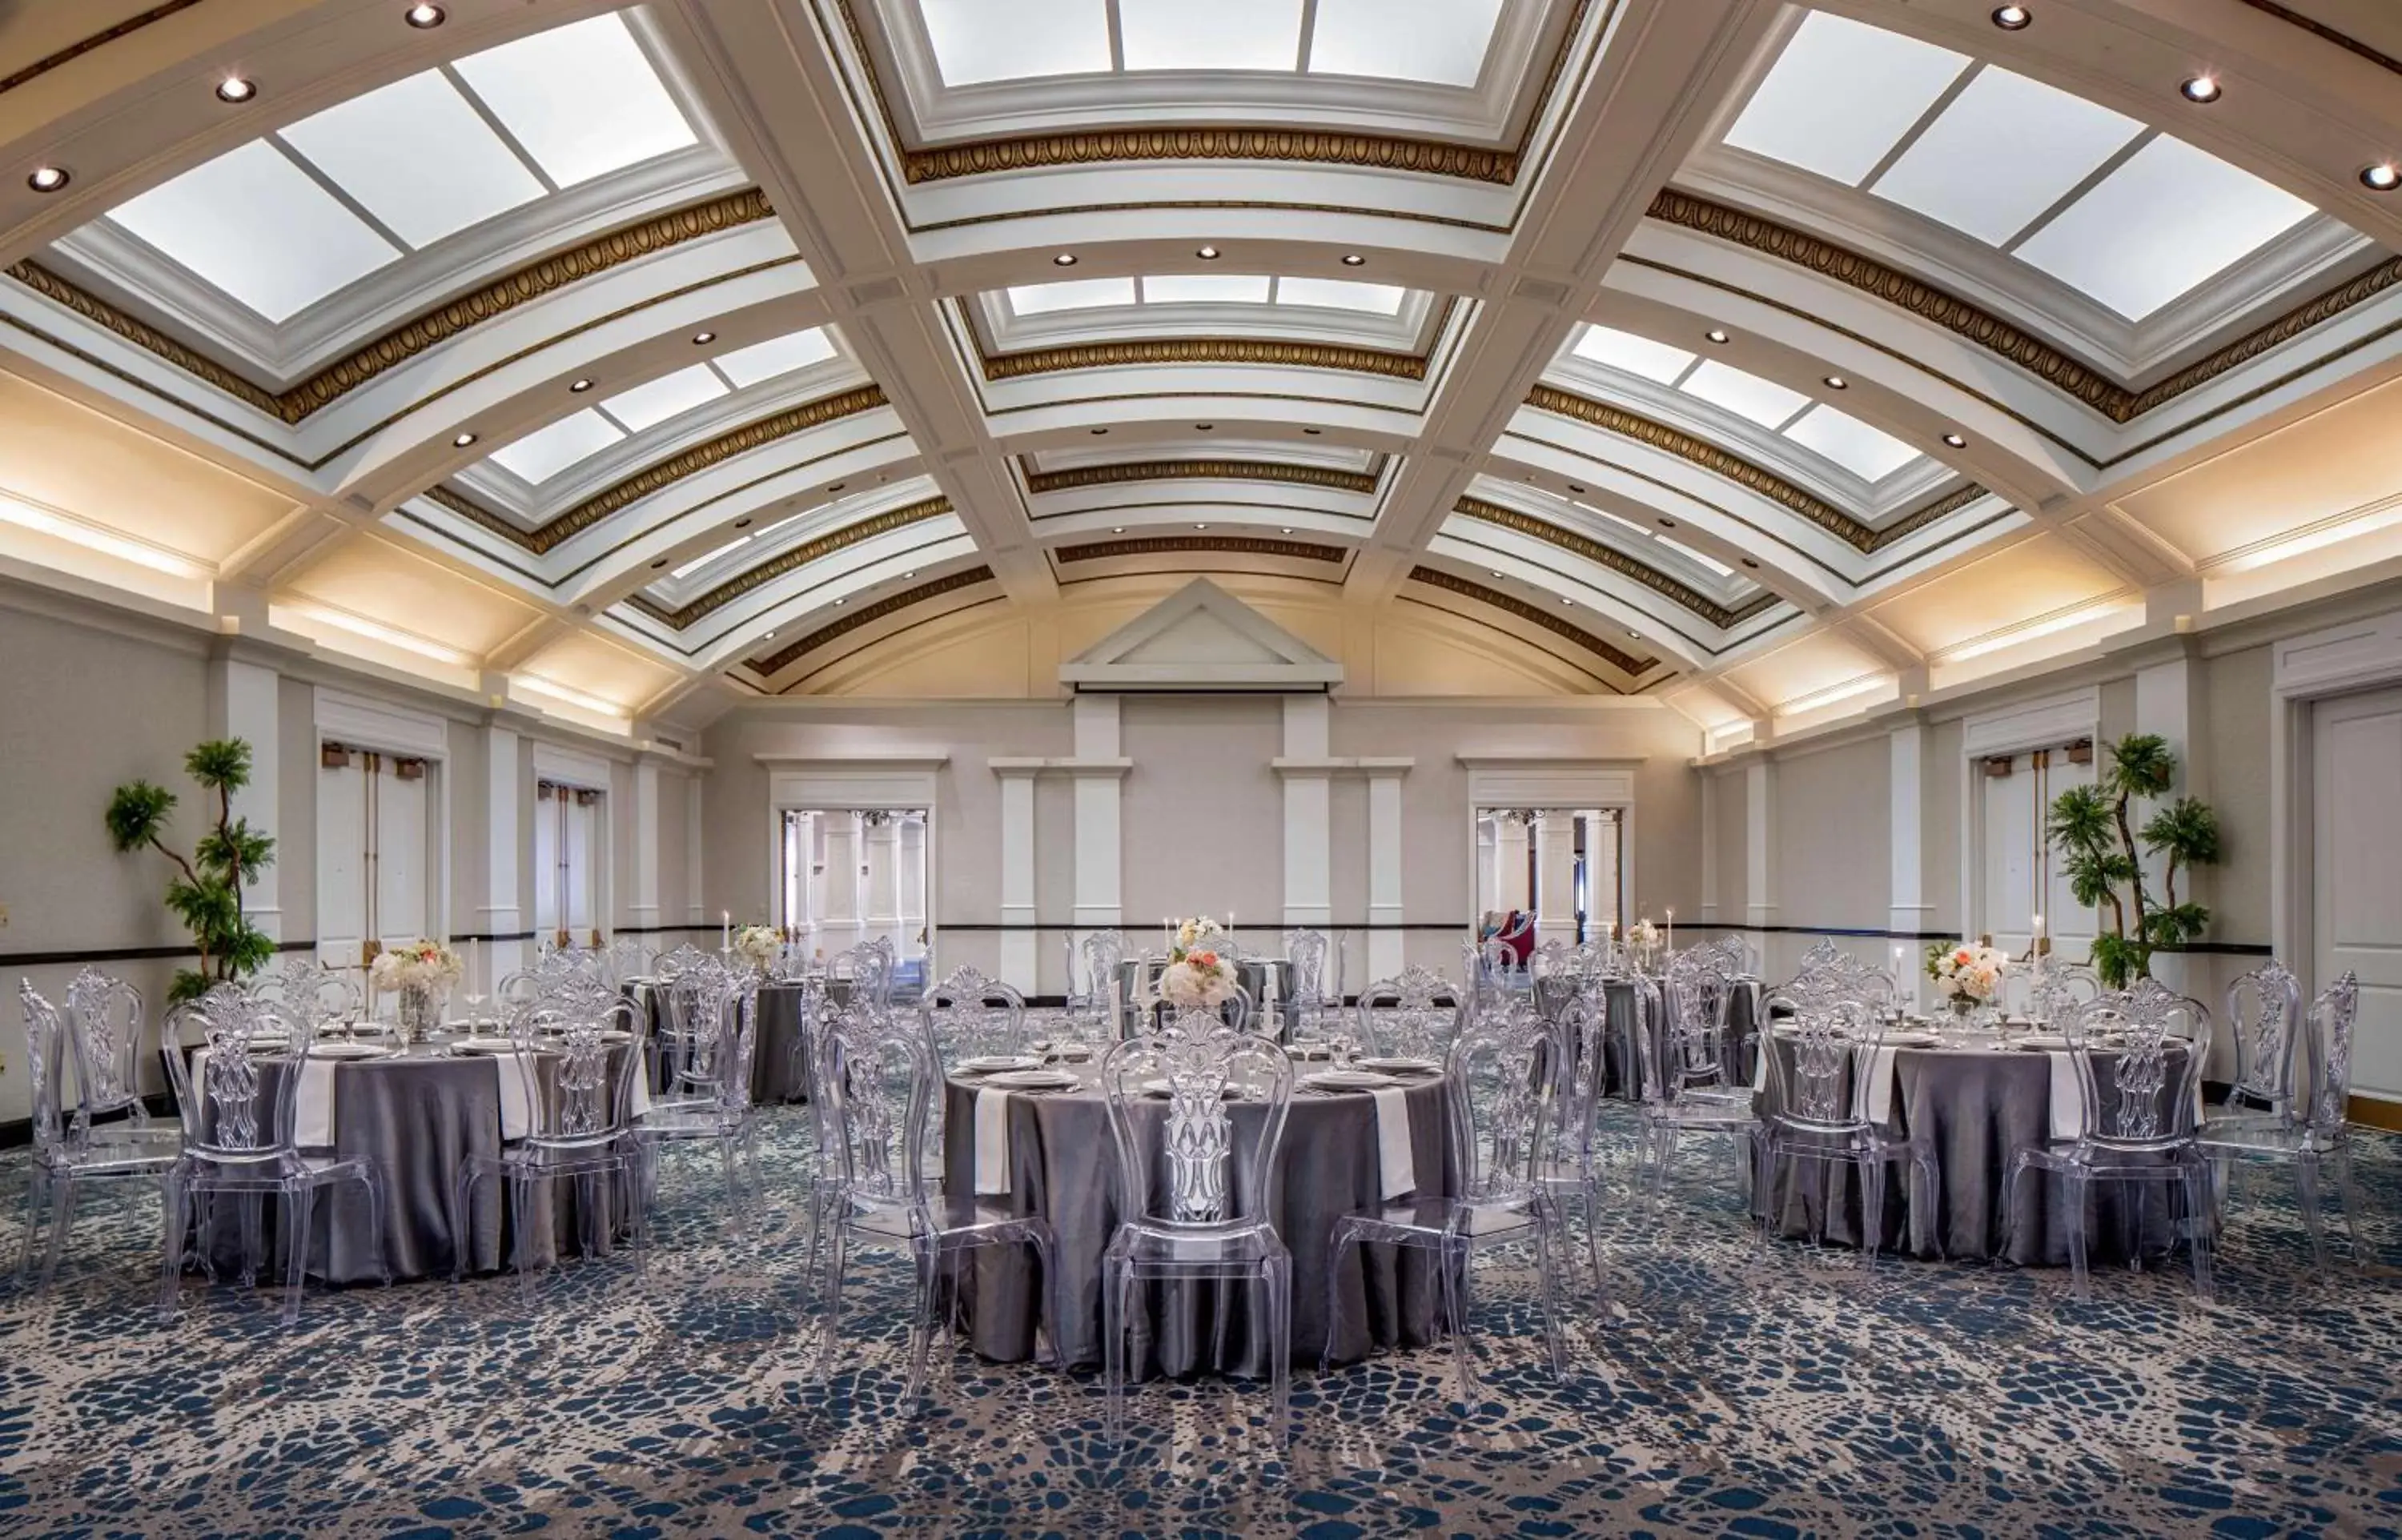 Meeting/conference room, Banquet Facilities in Hilton Garden Inn Jackson Downtown